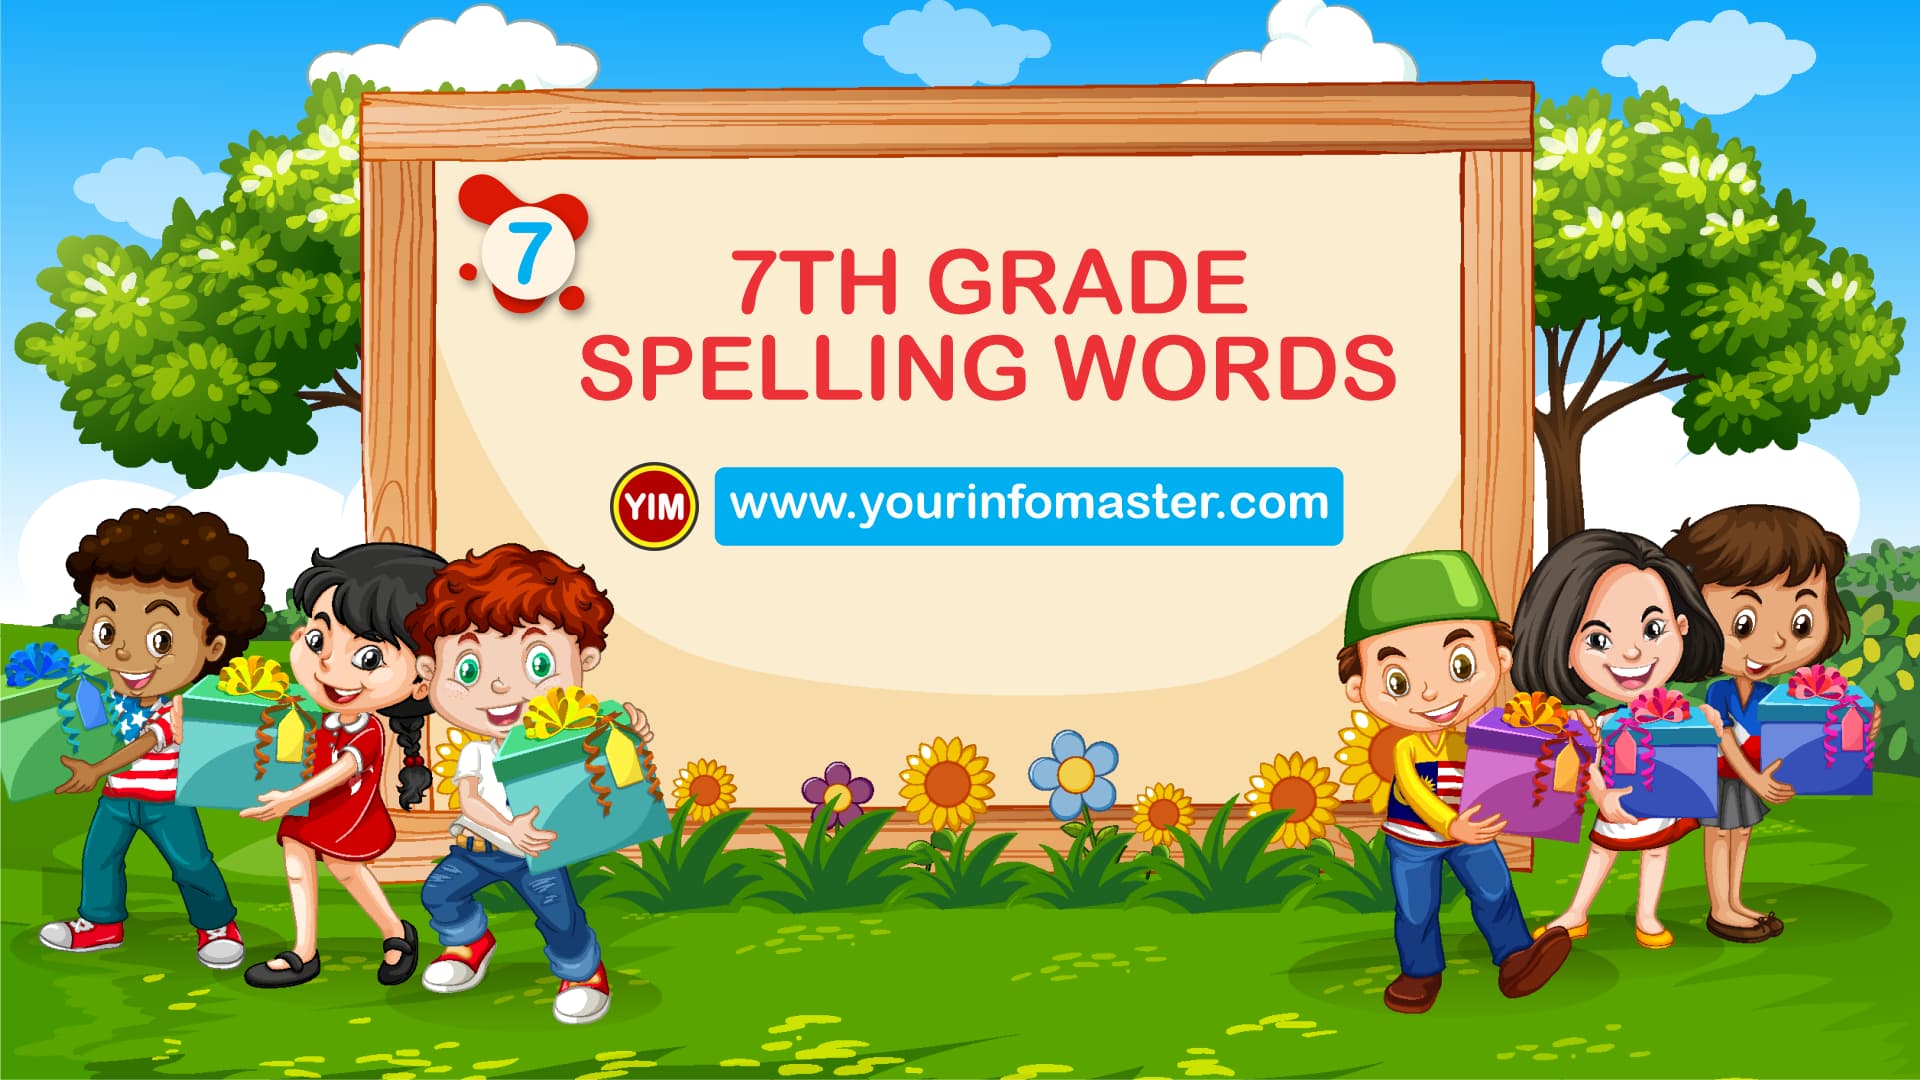 Spelling Words For 7th Grade Archives Your Info Master